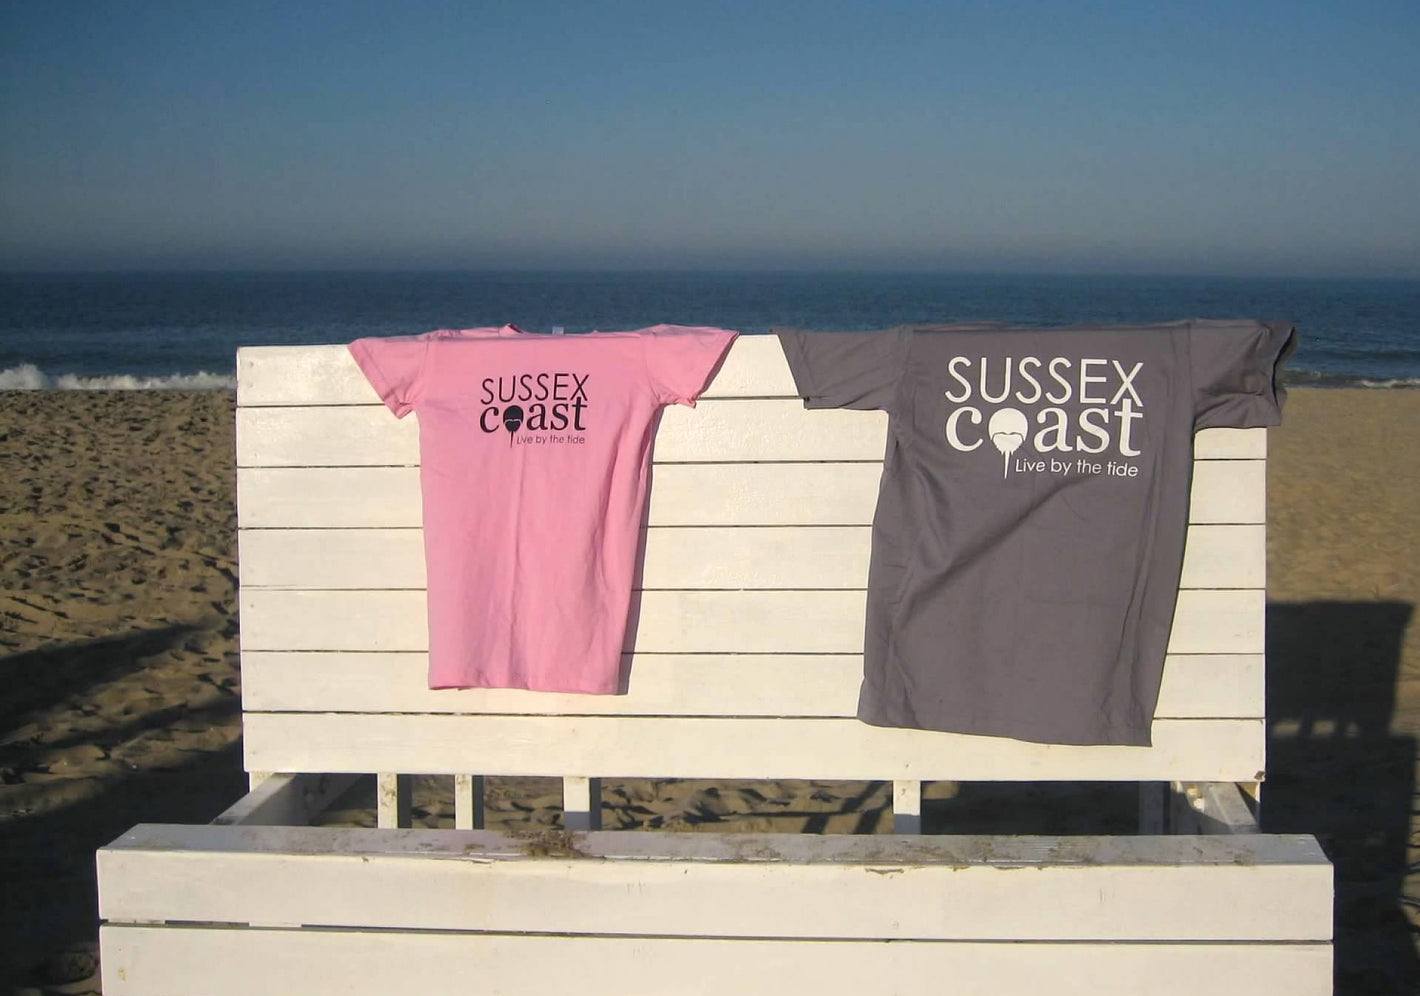 Pink and grey Sussex Coast t-shirts draped on lifeguard stand in Bethany Beach